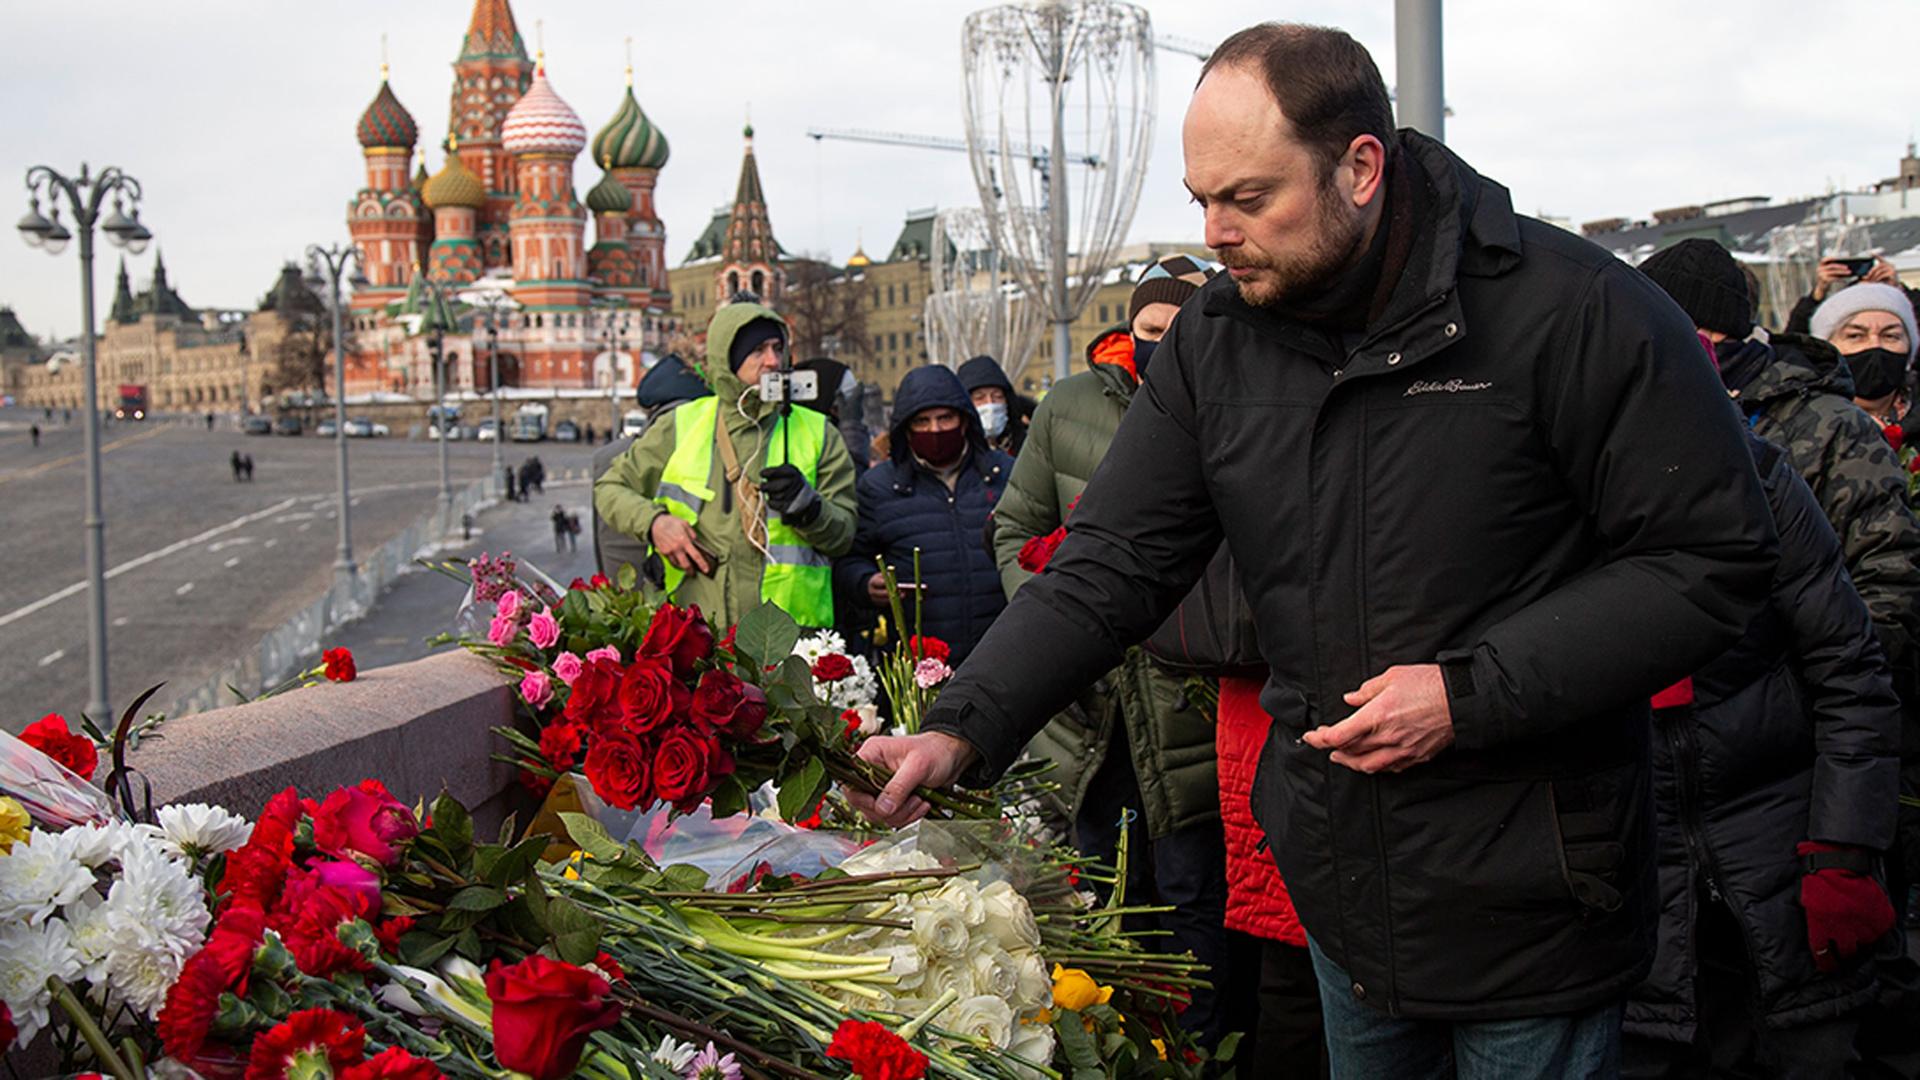 Russian opposition activist Vladimir Kara-Murza lays flowers near the place where Russian opposition leader Boris Nemtsov was gunned down, in Moscow, Russia